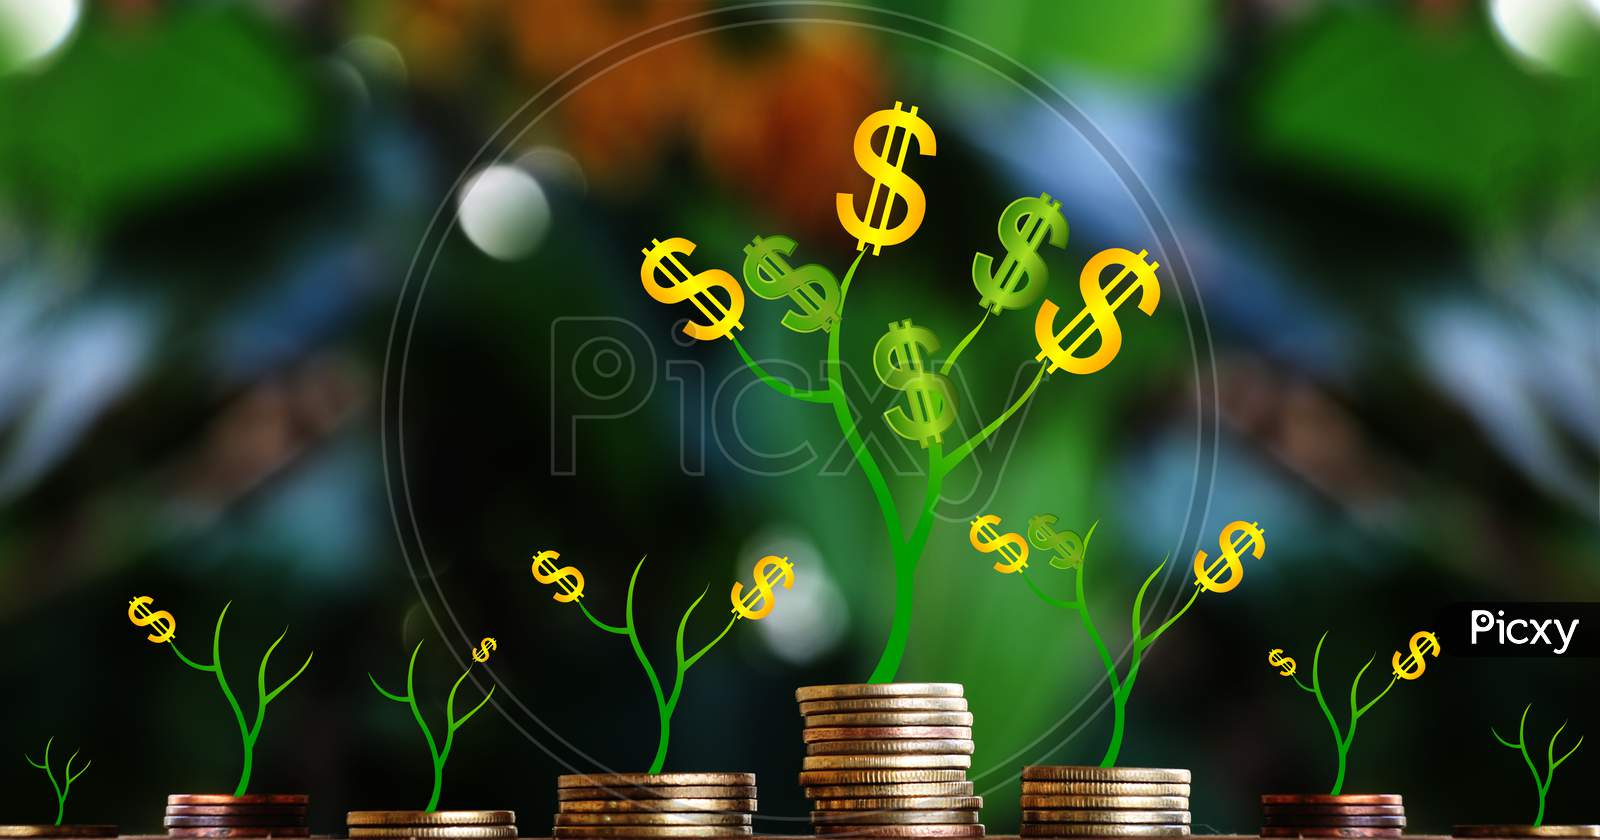 Plant Grow On Money Stacks In An Environment With This Money Saving And Sustainable Business Investment Idea